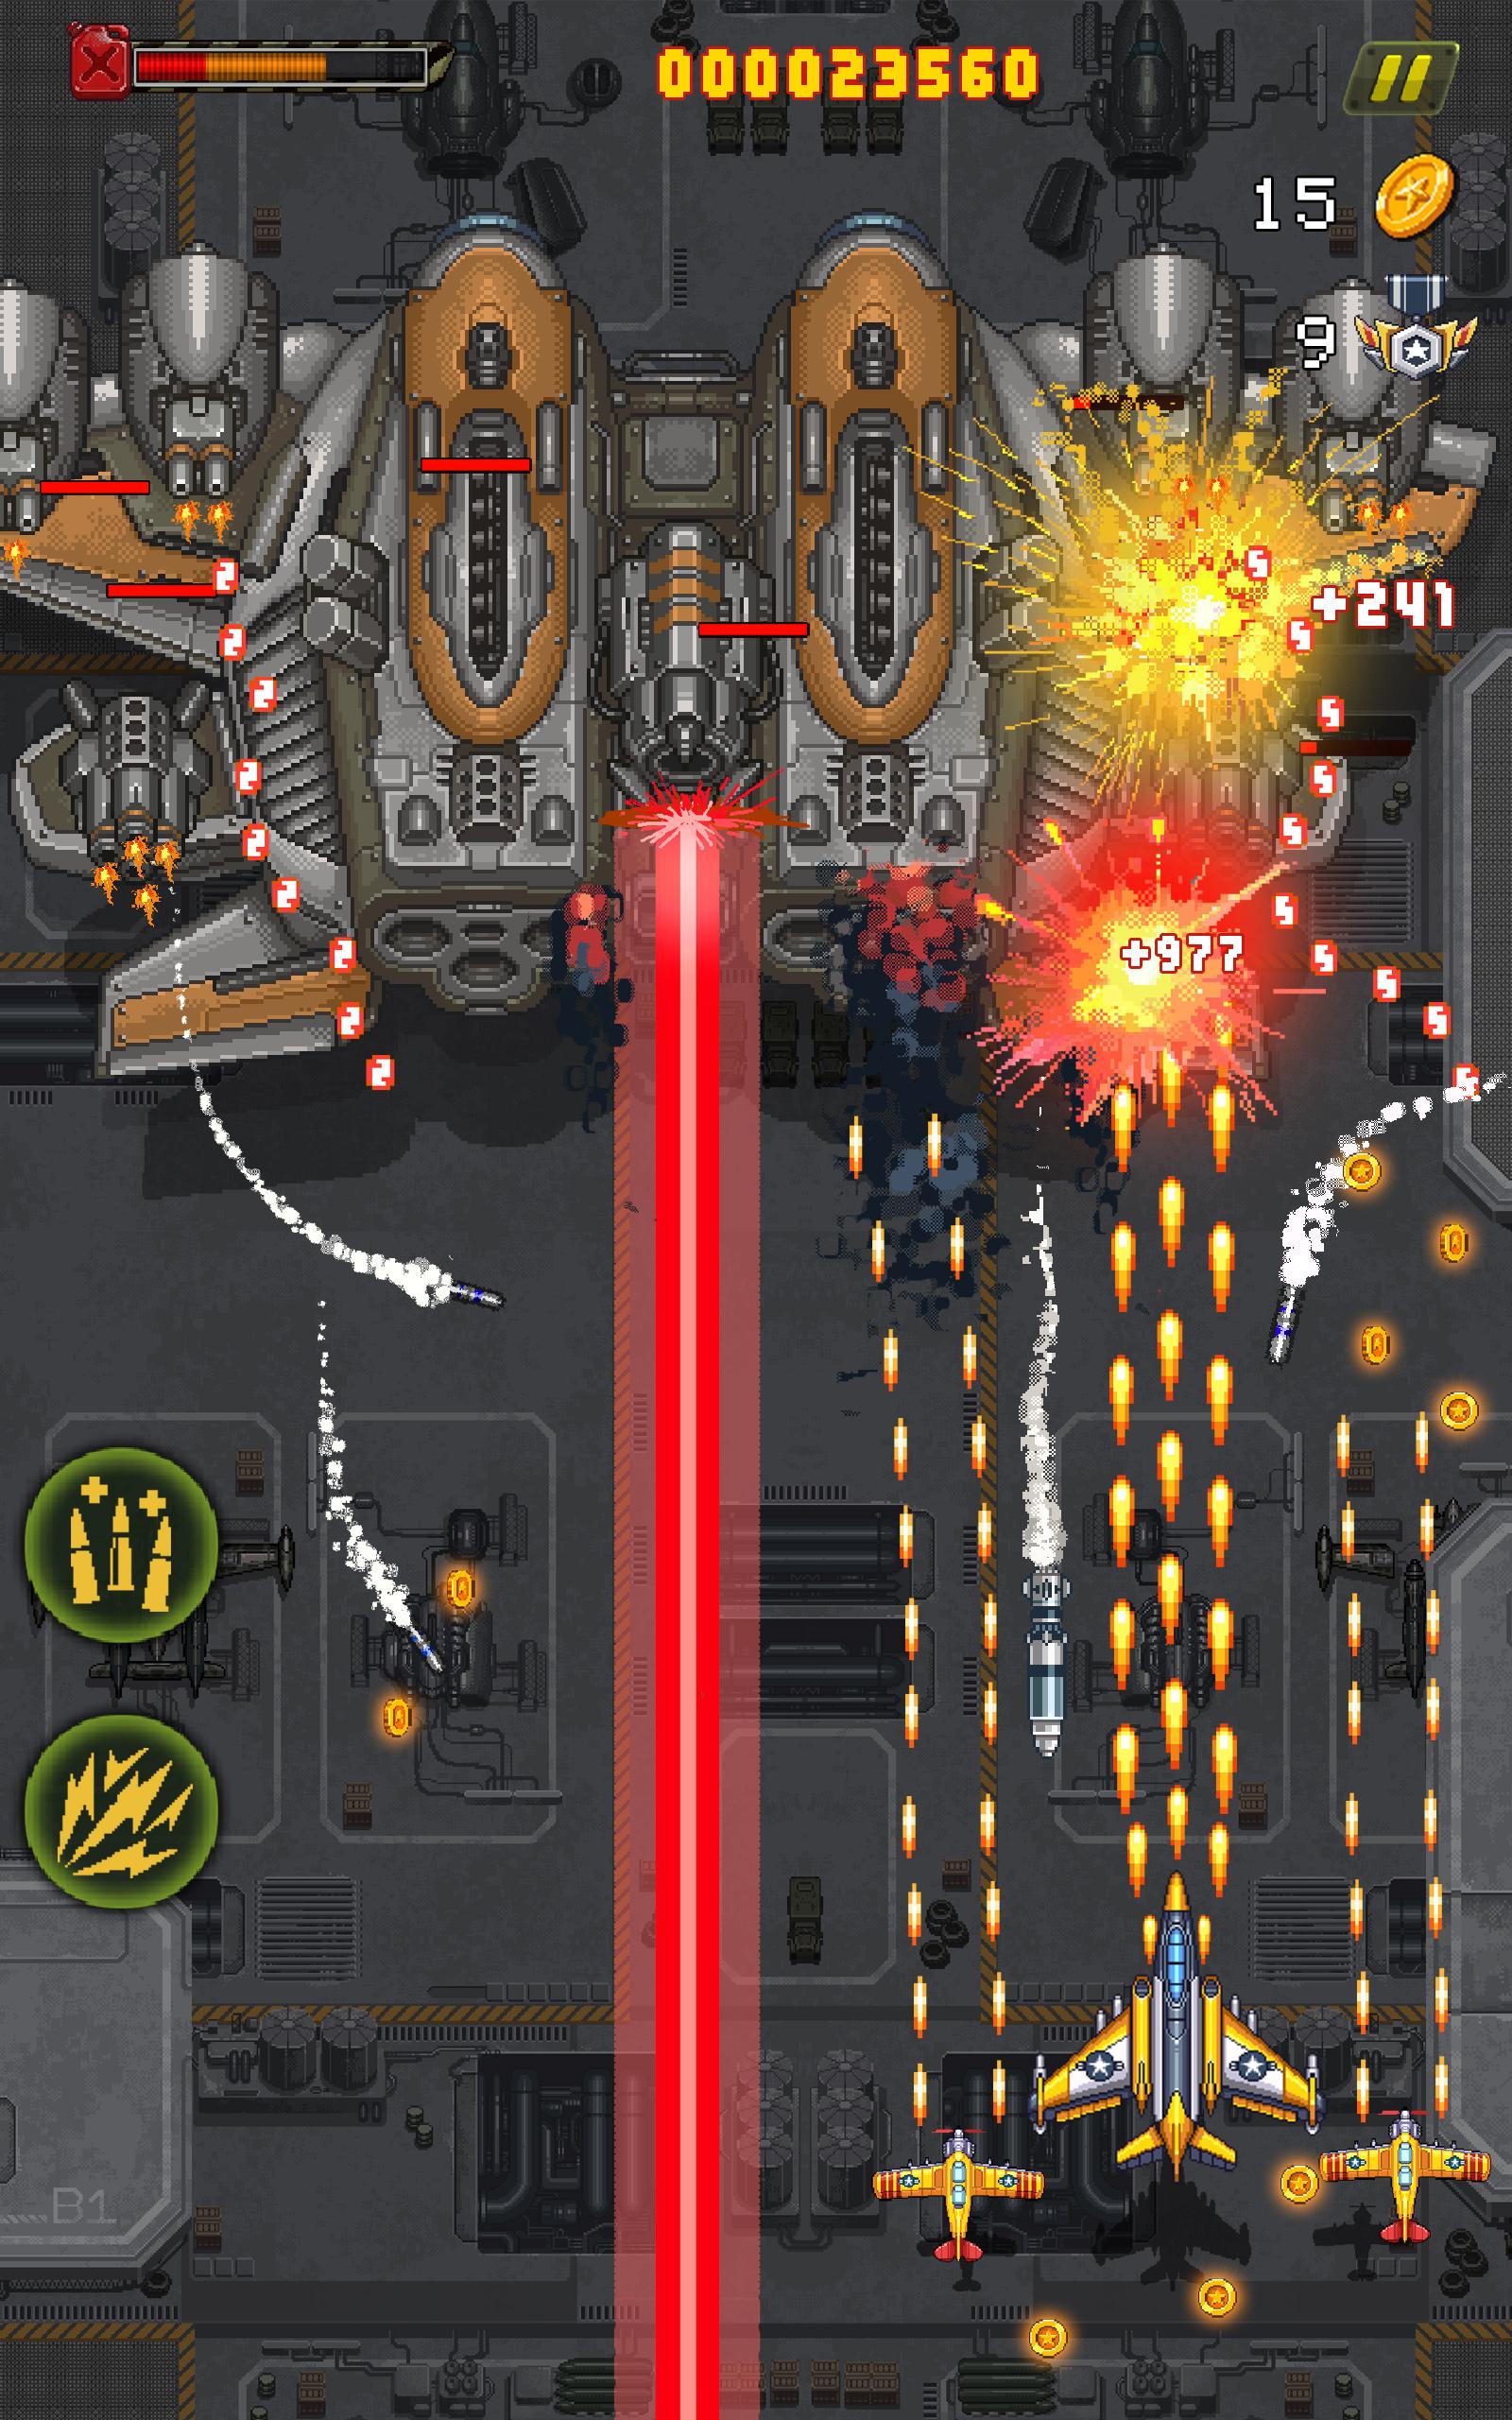 1945 Airforce Free Arcade Shooting Games For Android Apk Download